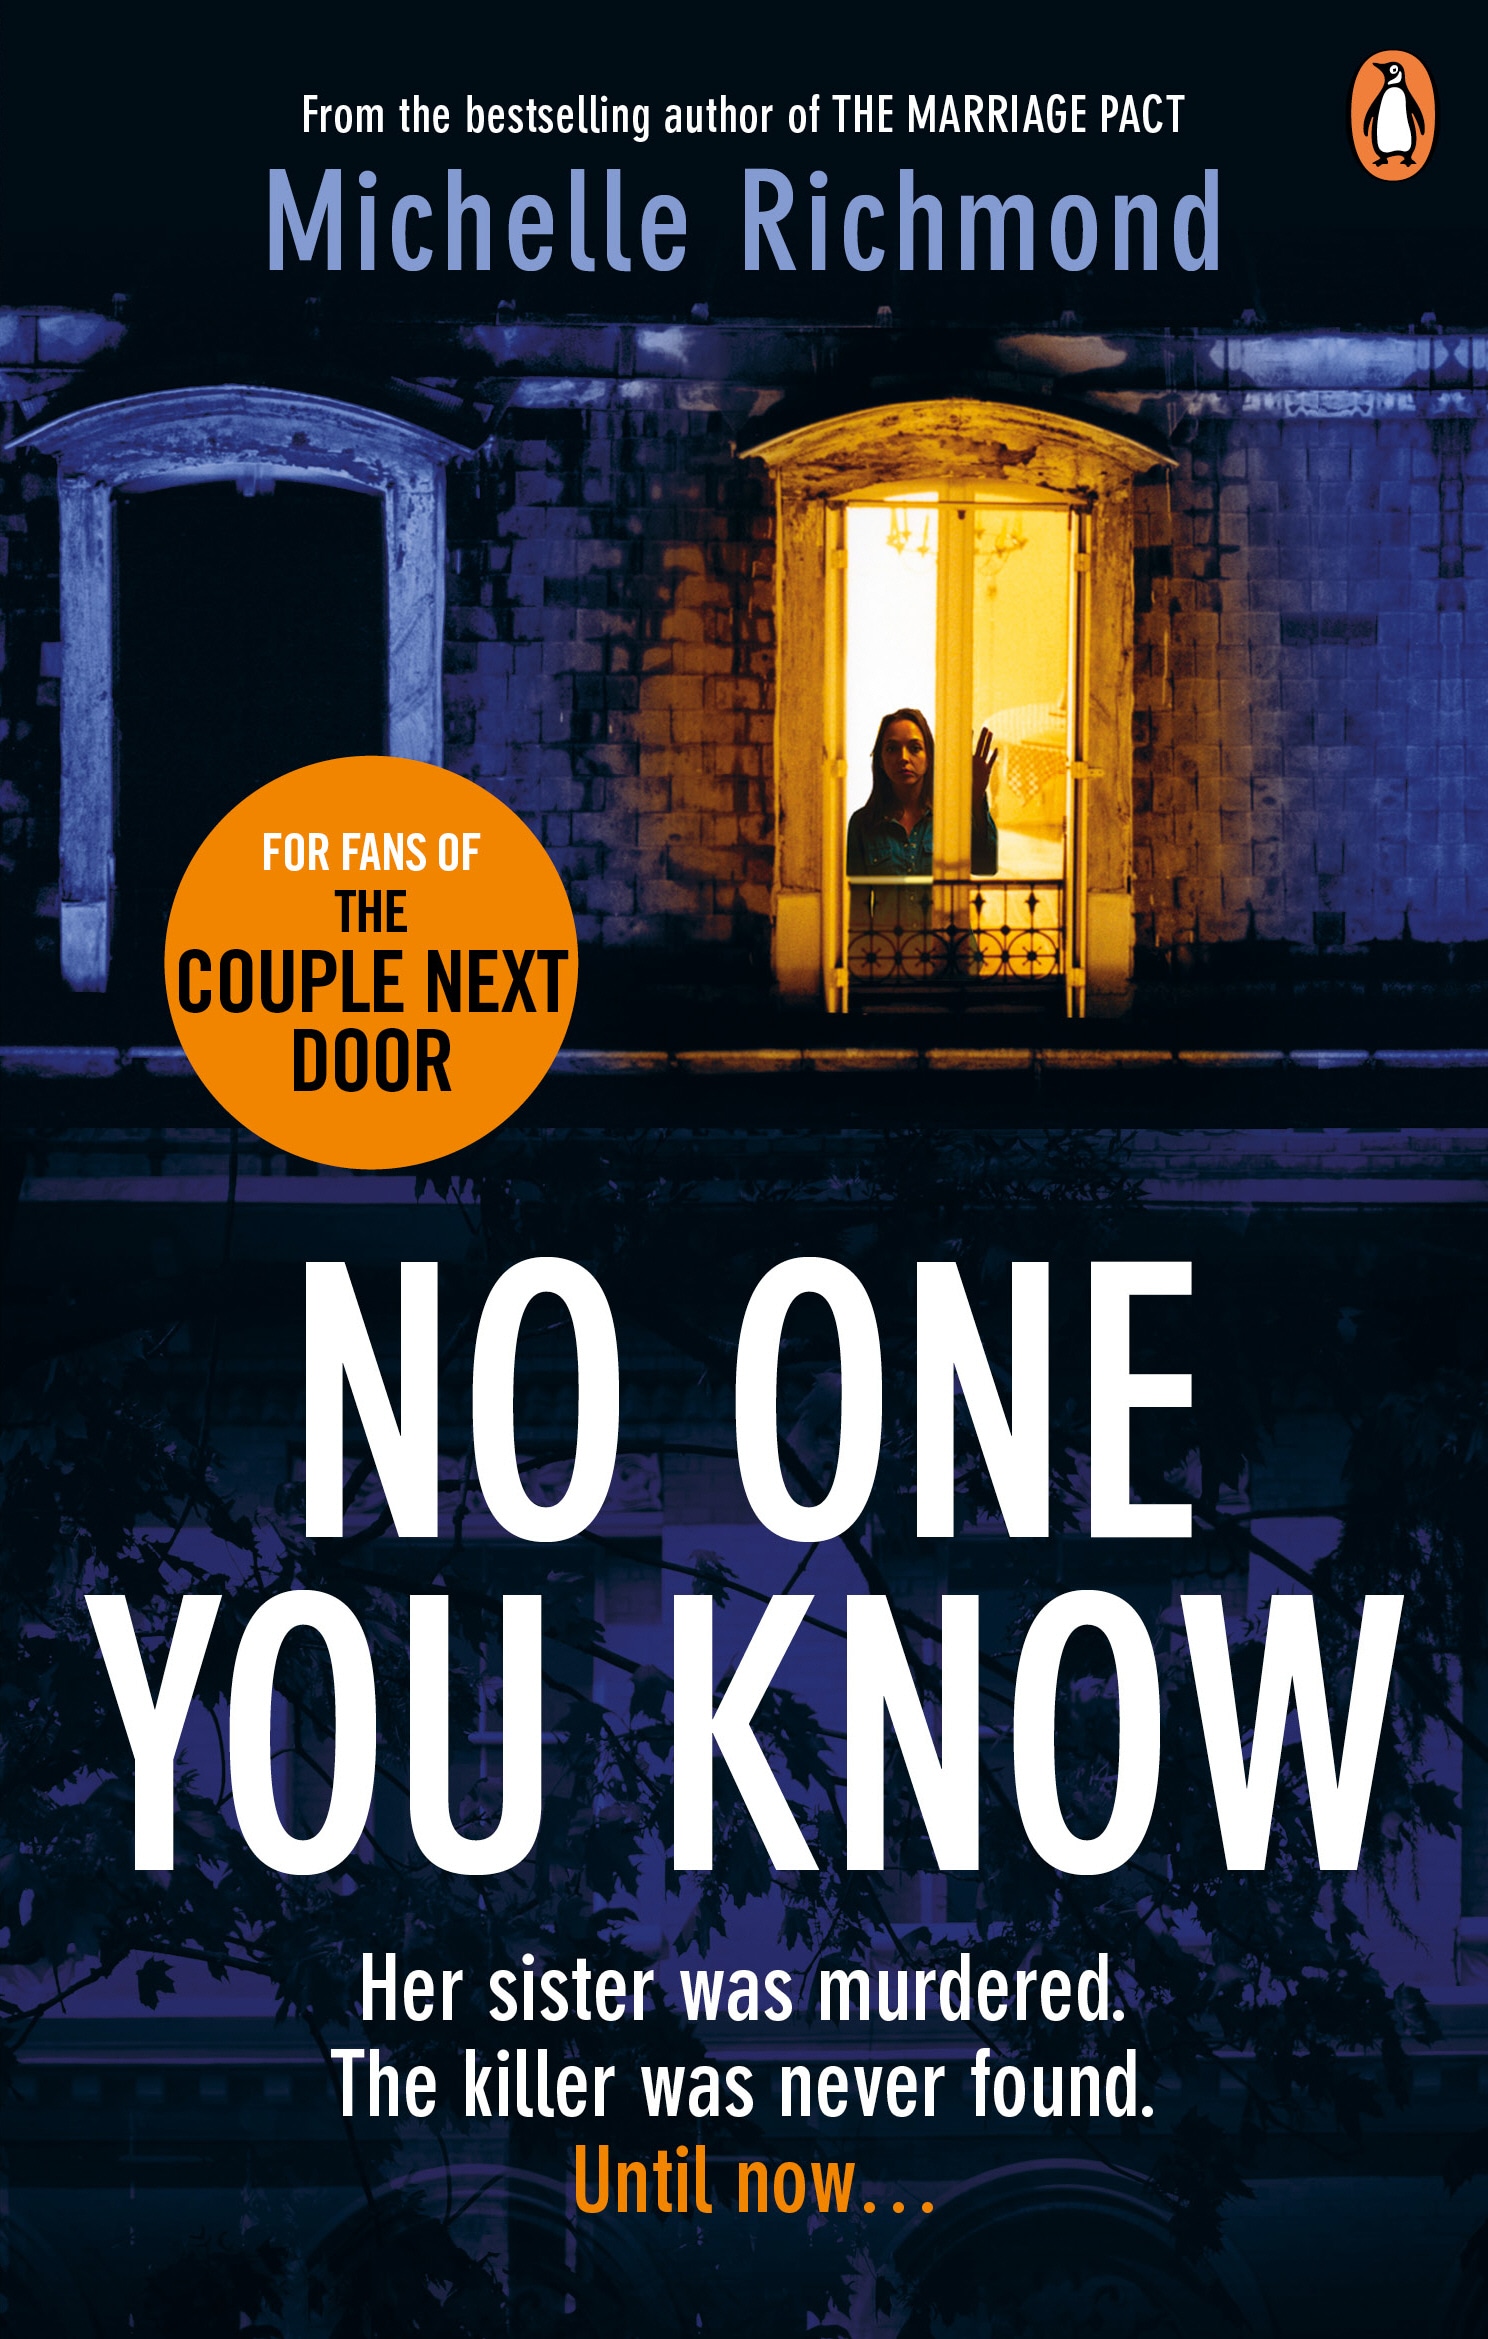 Book “No One You Know” by Michelle Richmond — January 24, 2019